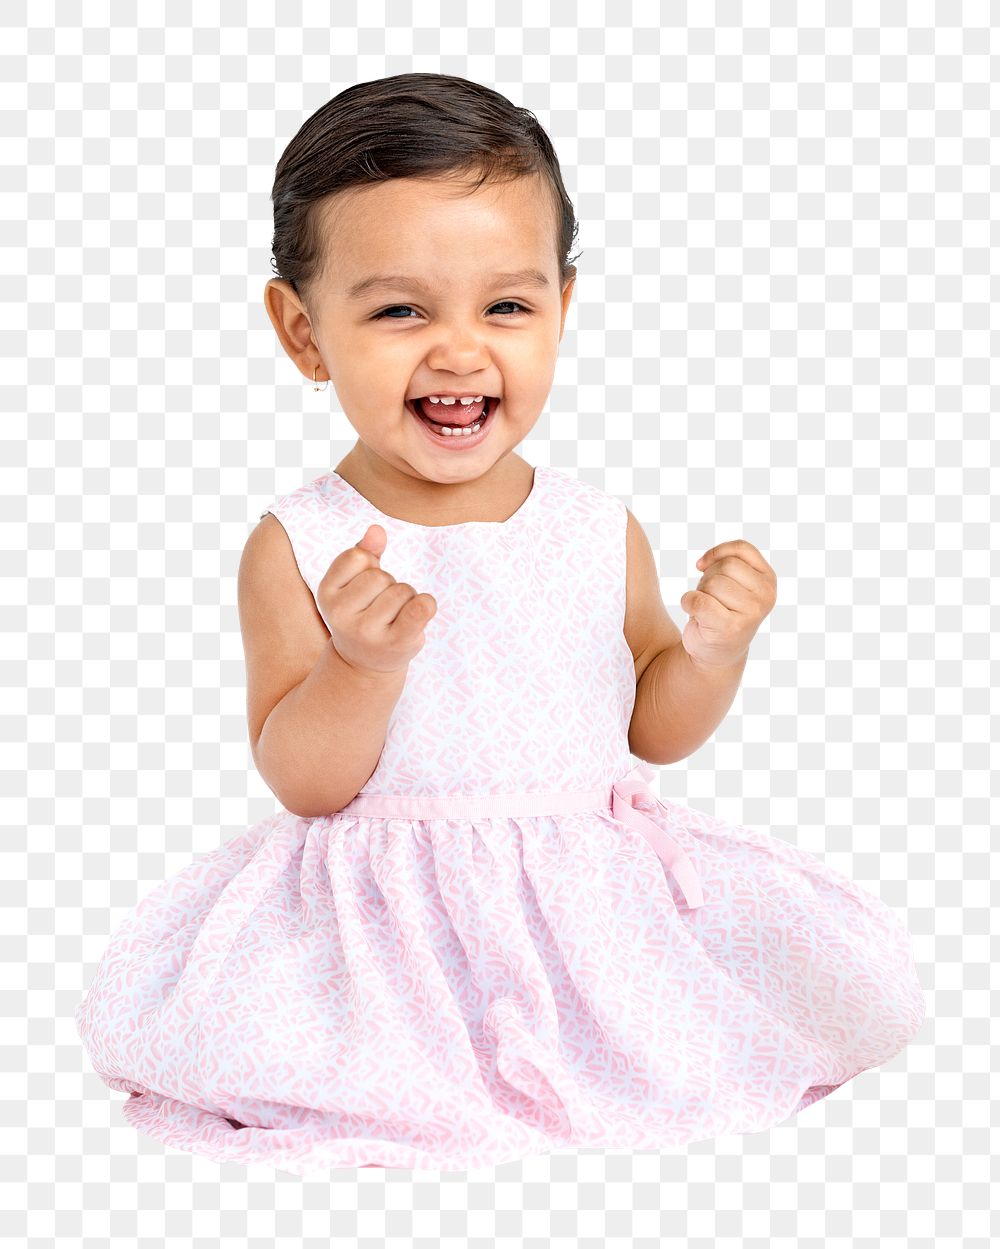 Cheerful baby png girl, transparent background